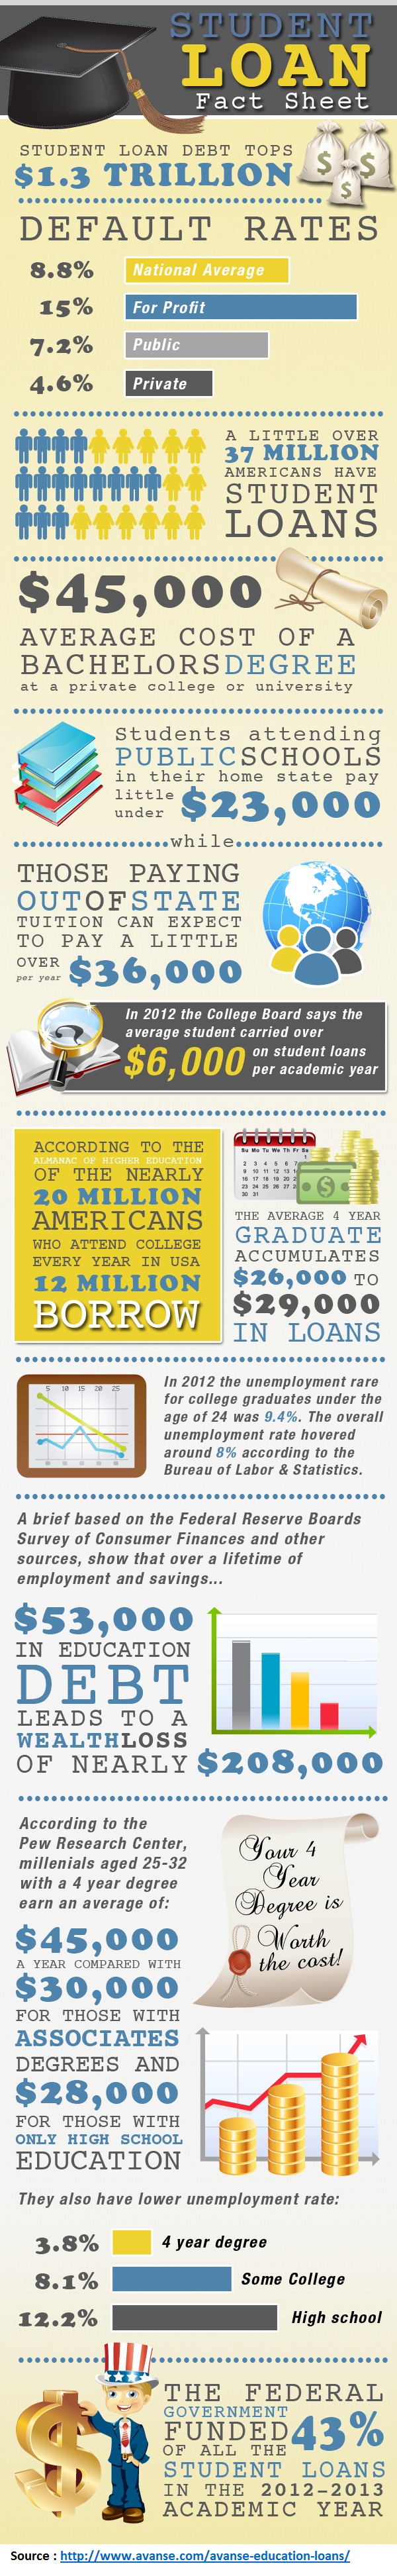 how-to-get-a-rebate-on-consolidated-student-loans-11-steps